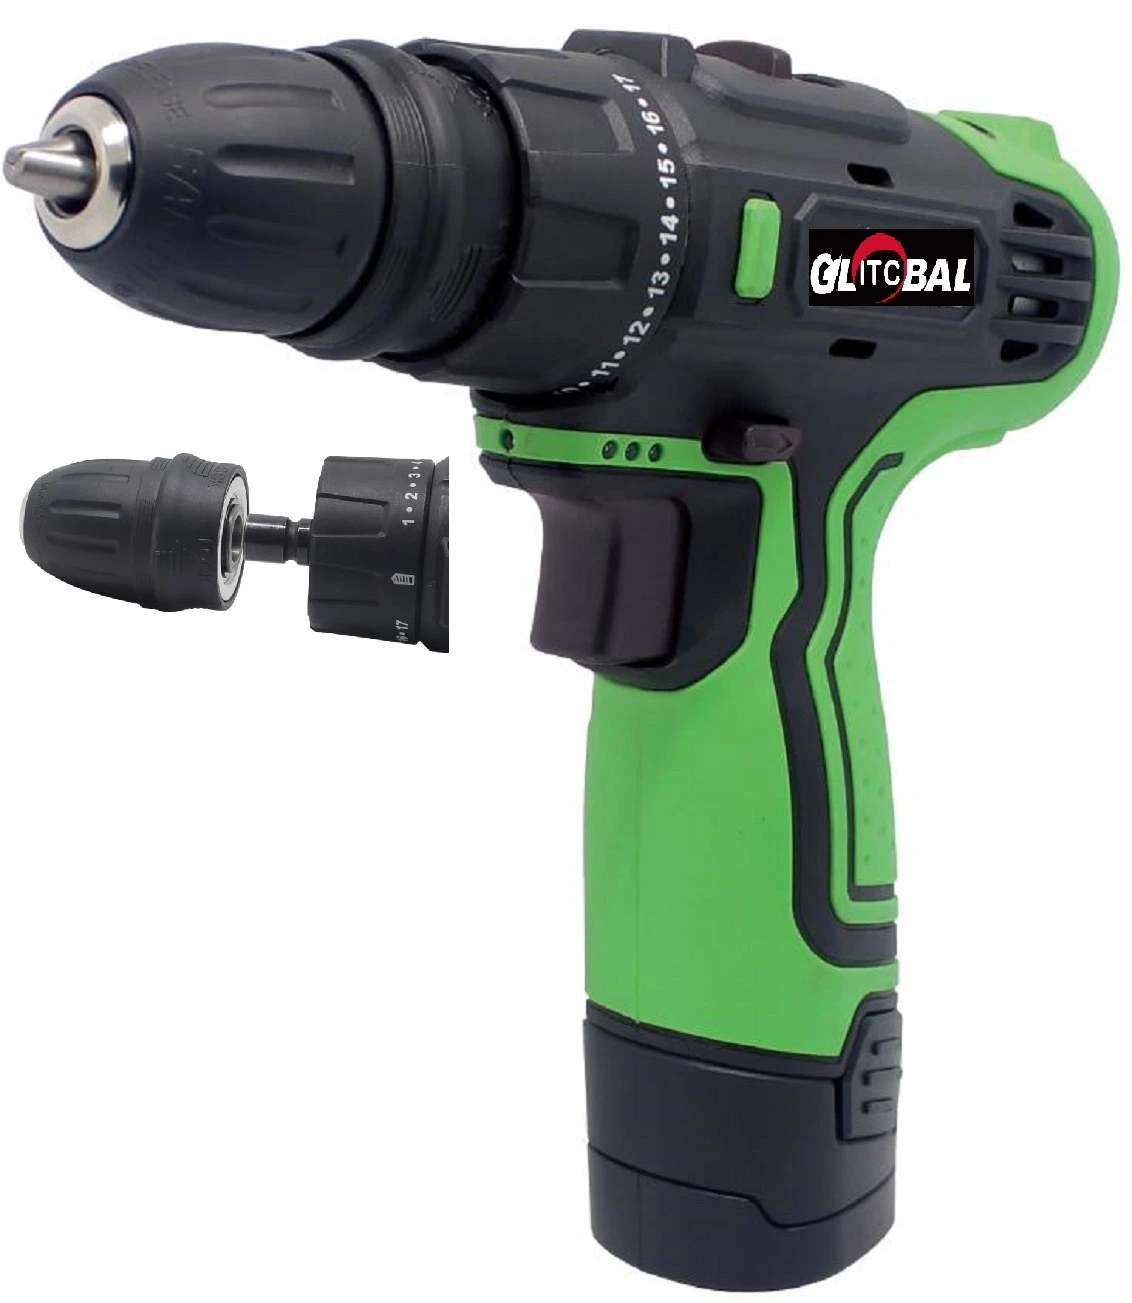 2 in 1 Li-ion Battery Cordless/Electric Impact Drill/Screwdriver-Power Machine Tools